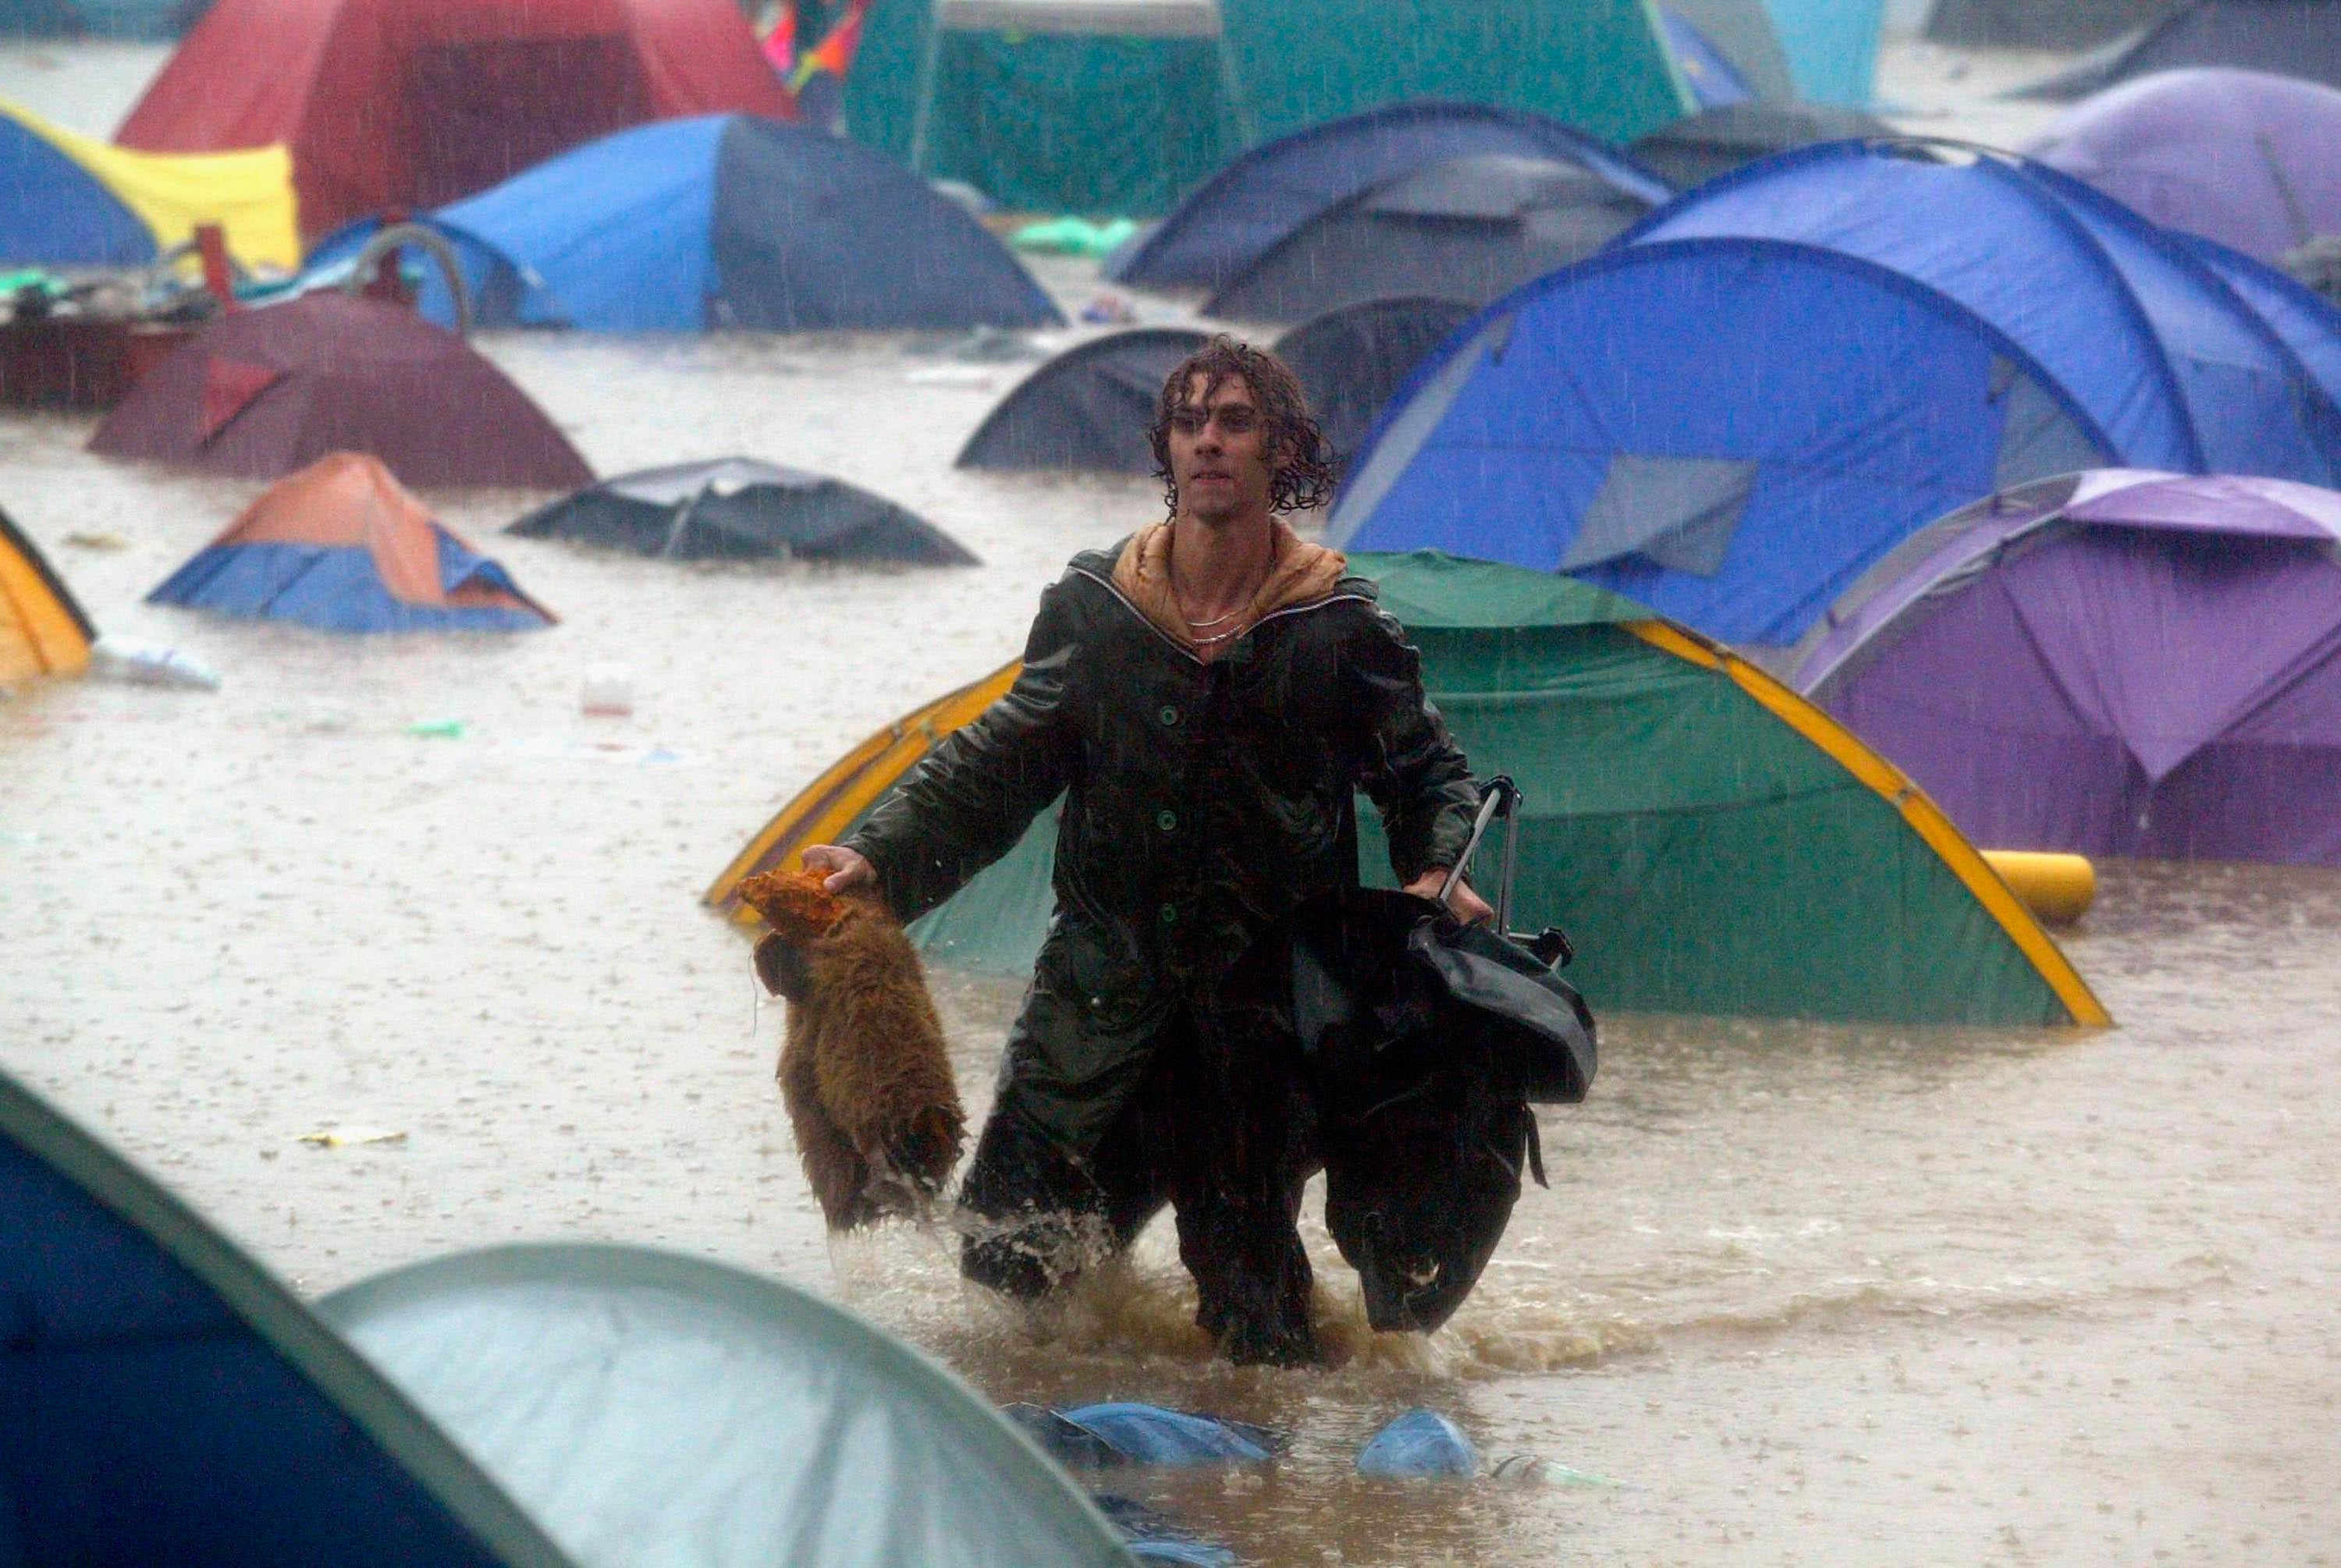 A festival-goer tries to rescue belongings washed away in 2005